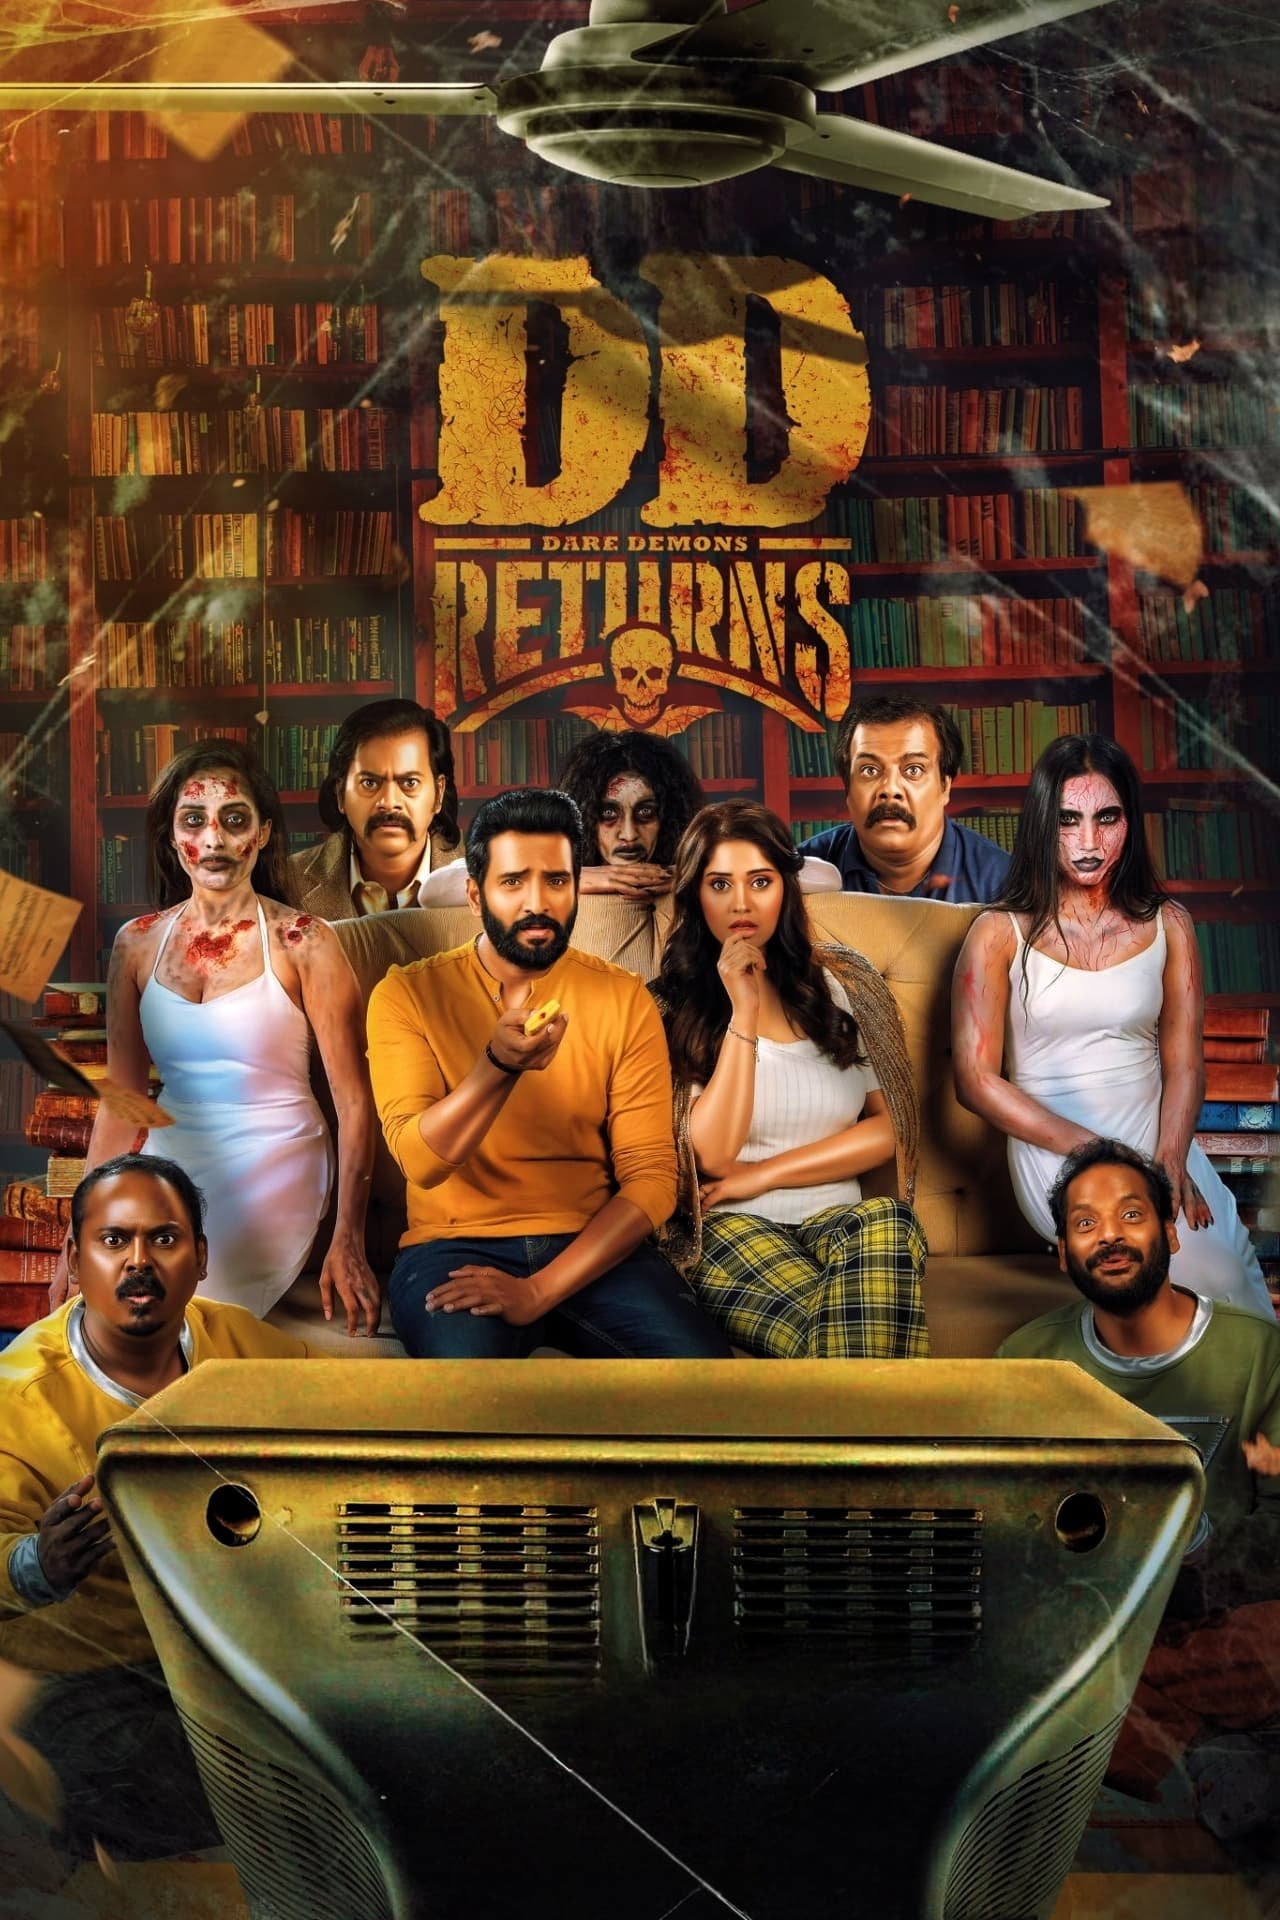 Poster for the movie "DD Returns"